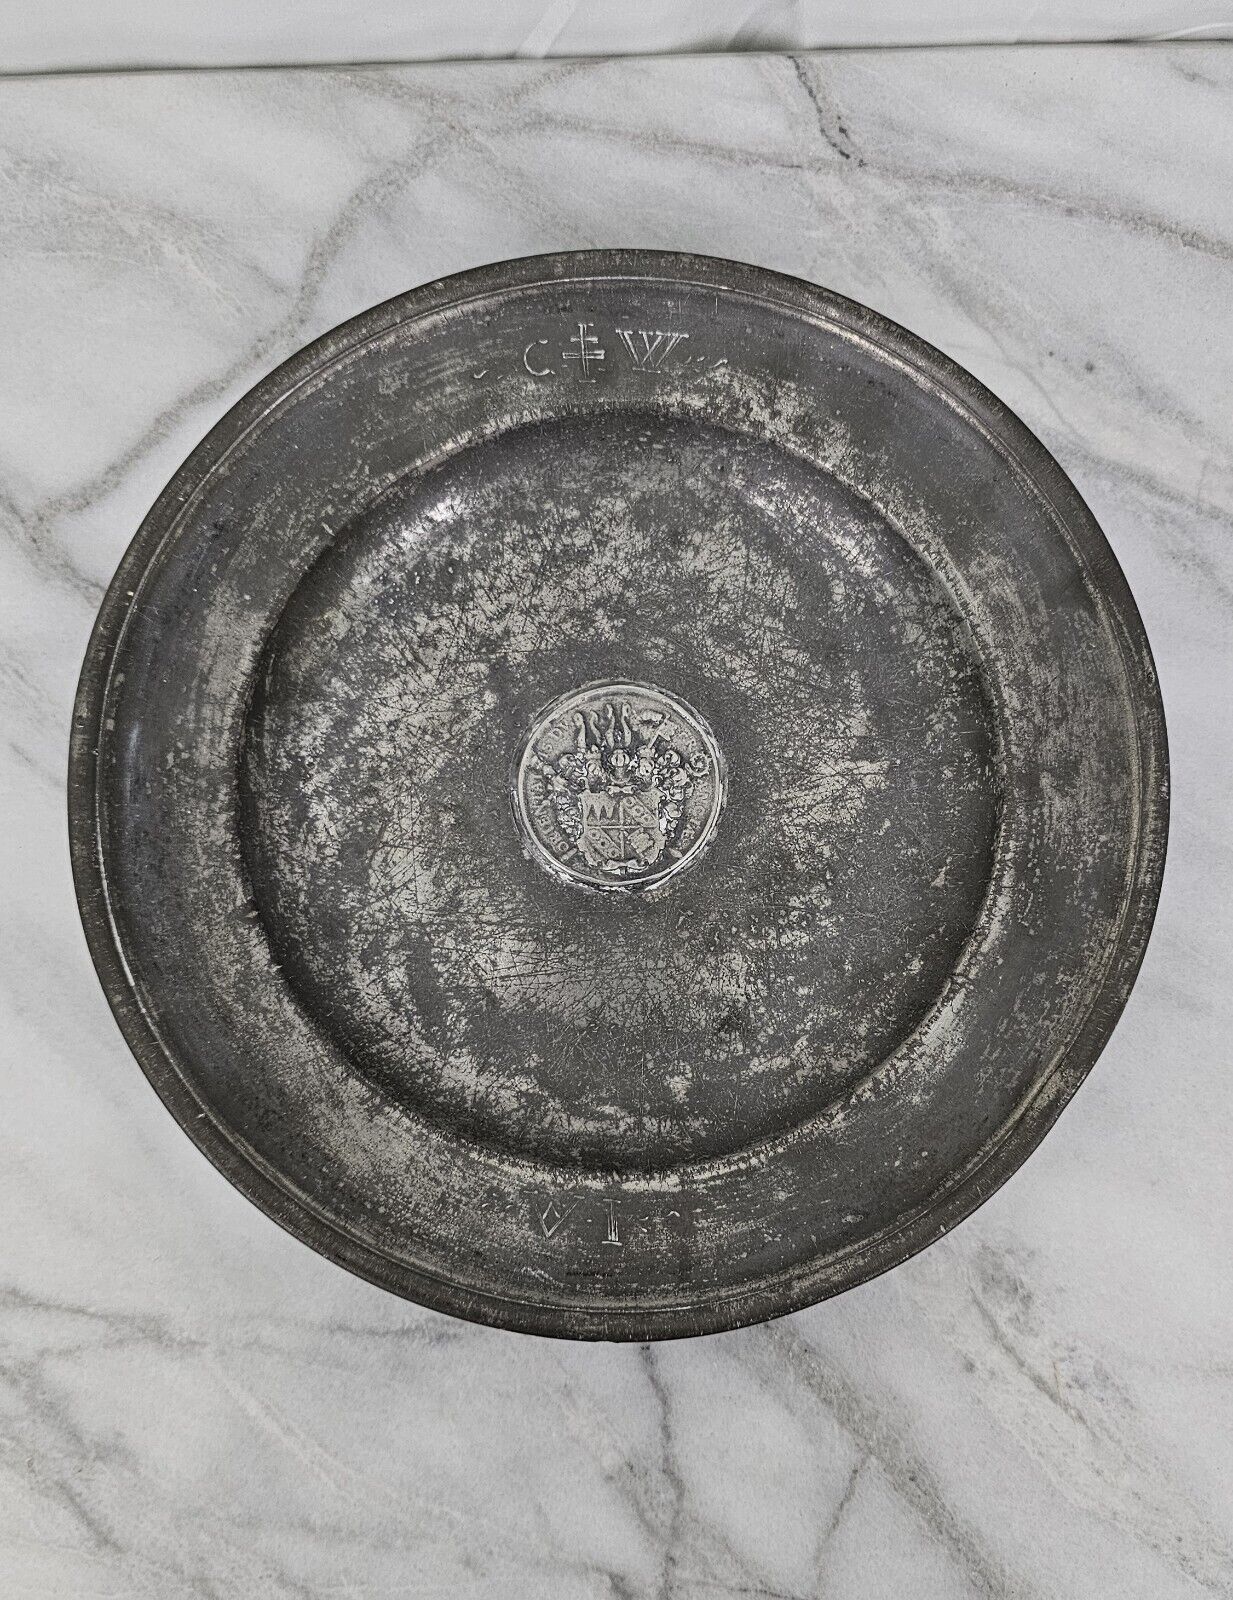 Antique 18th Century Pewter Plate With Emblem Shield Coat Of Arms. 1700s